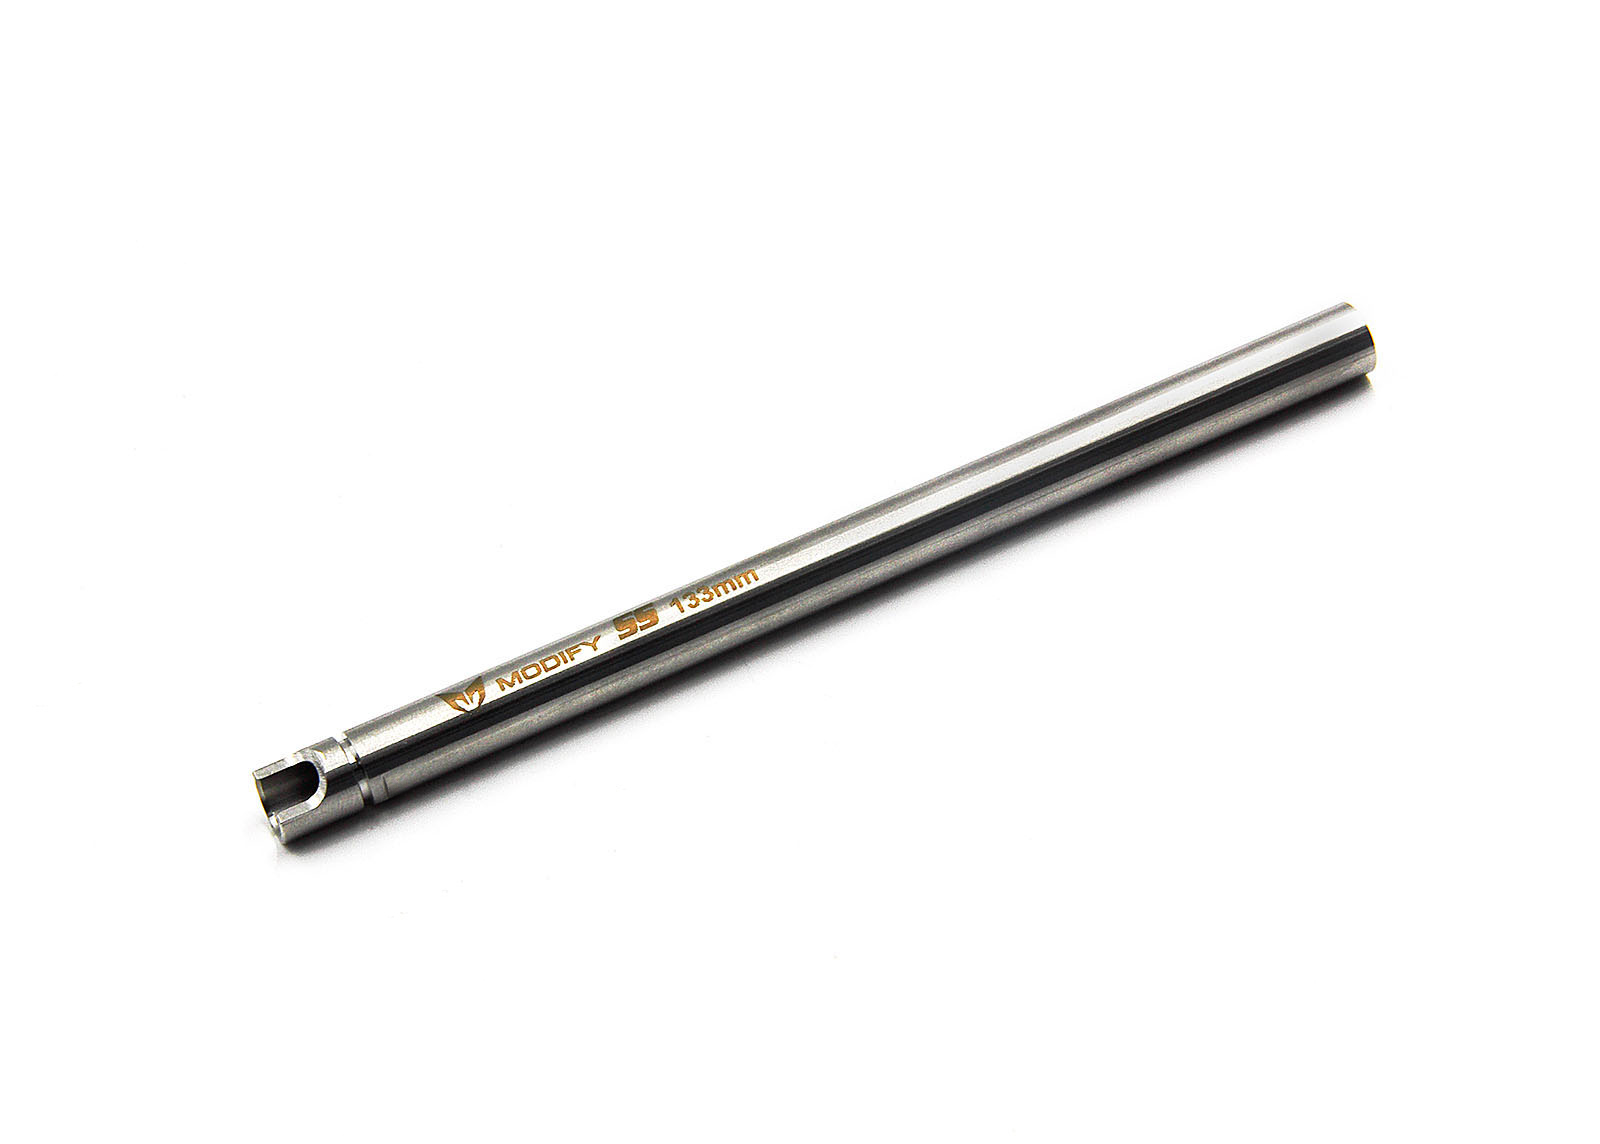 Stainless Steel 6.03mm Precision GBB Inner Barrel 133mm - Modify Airsfot Parts